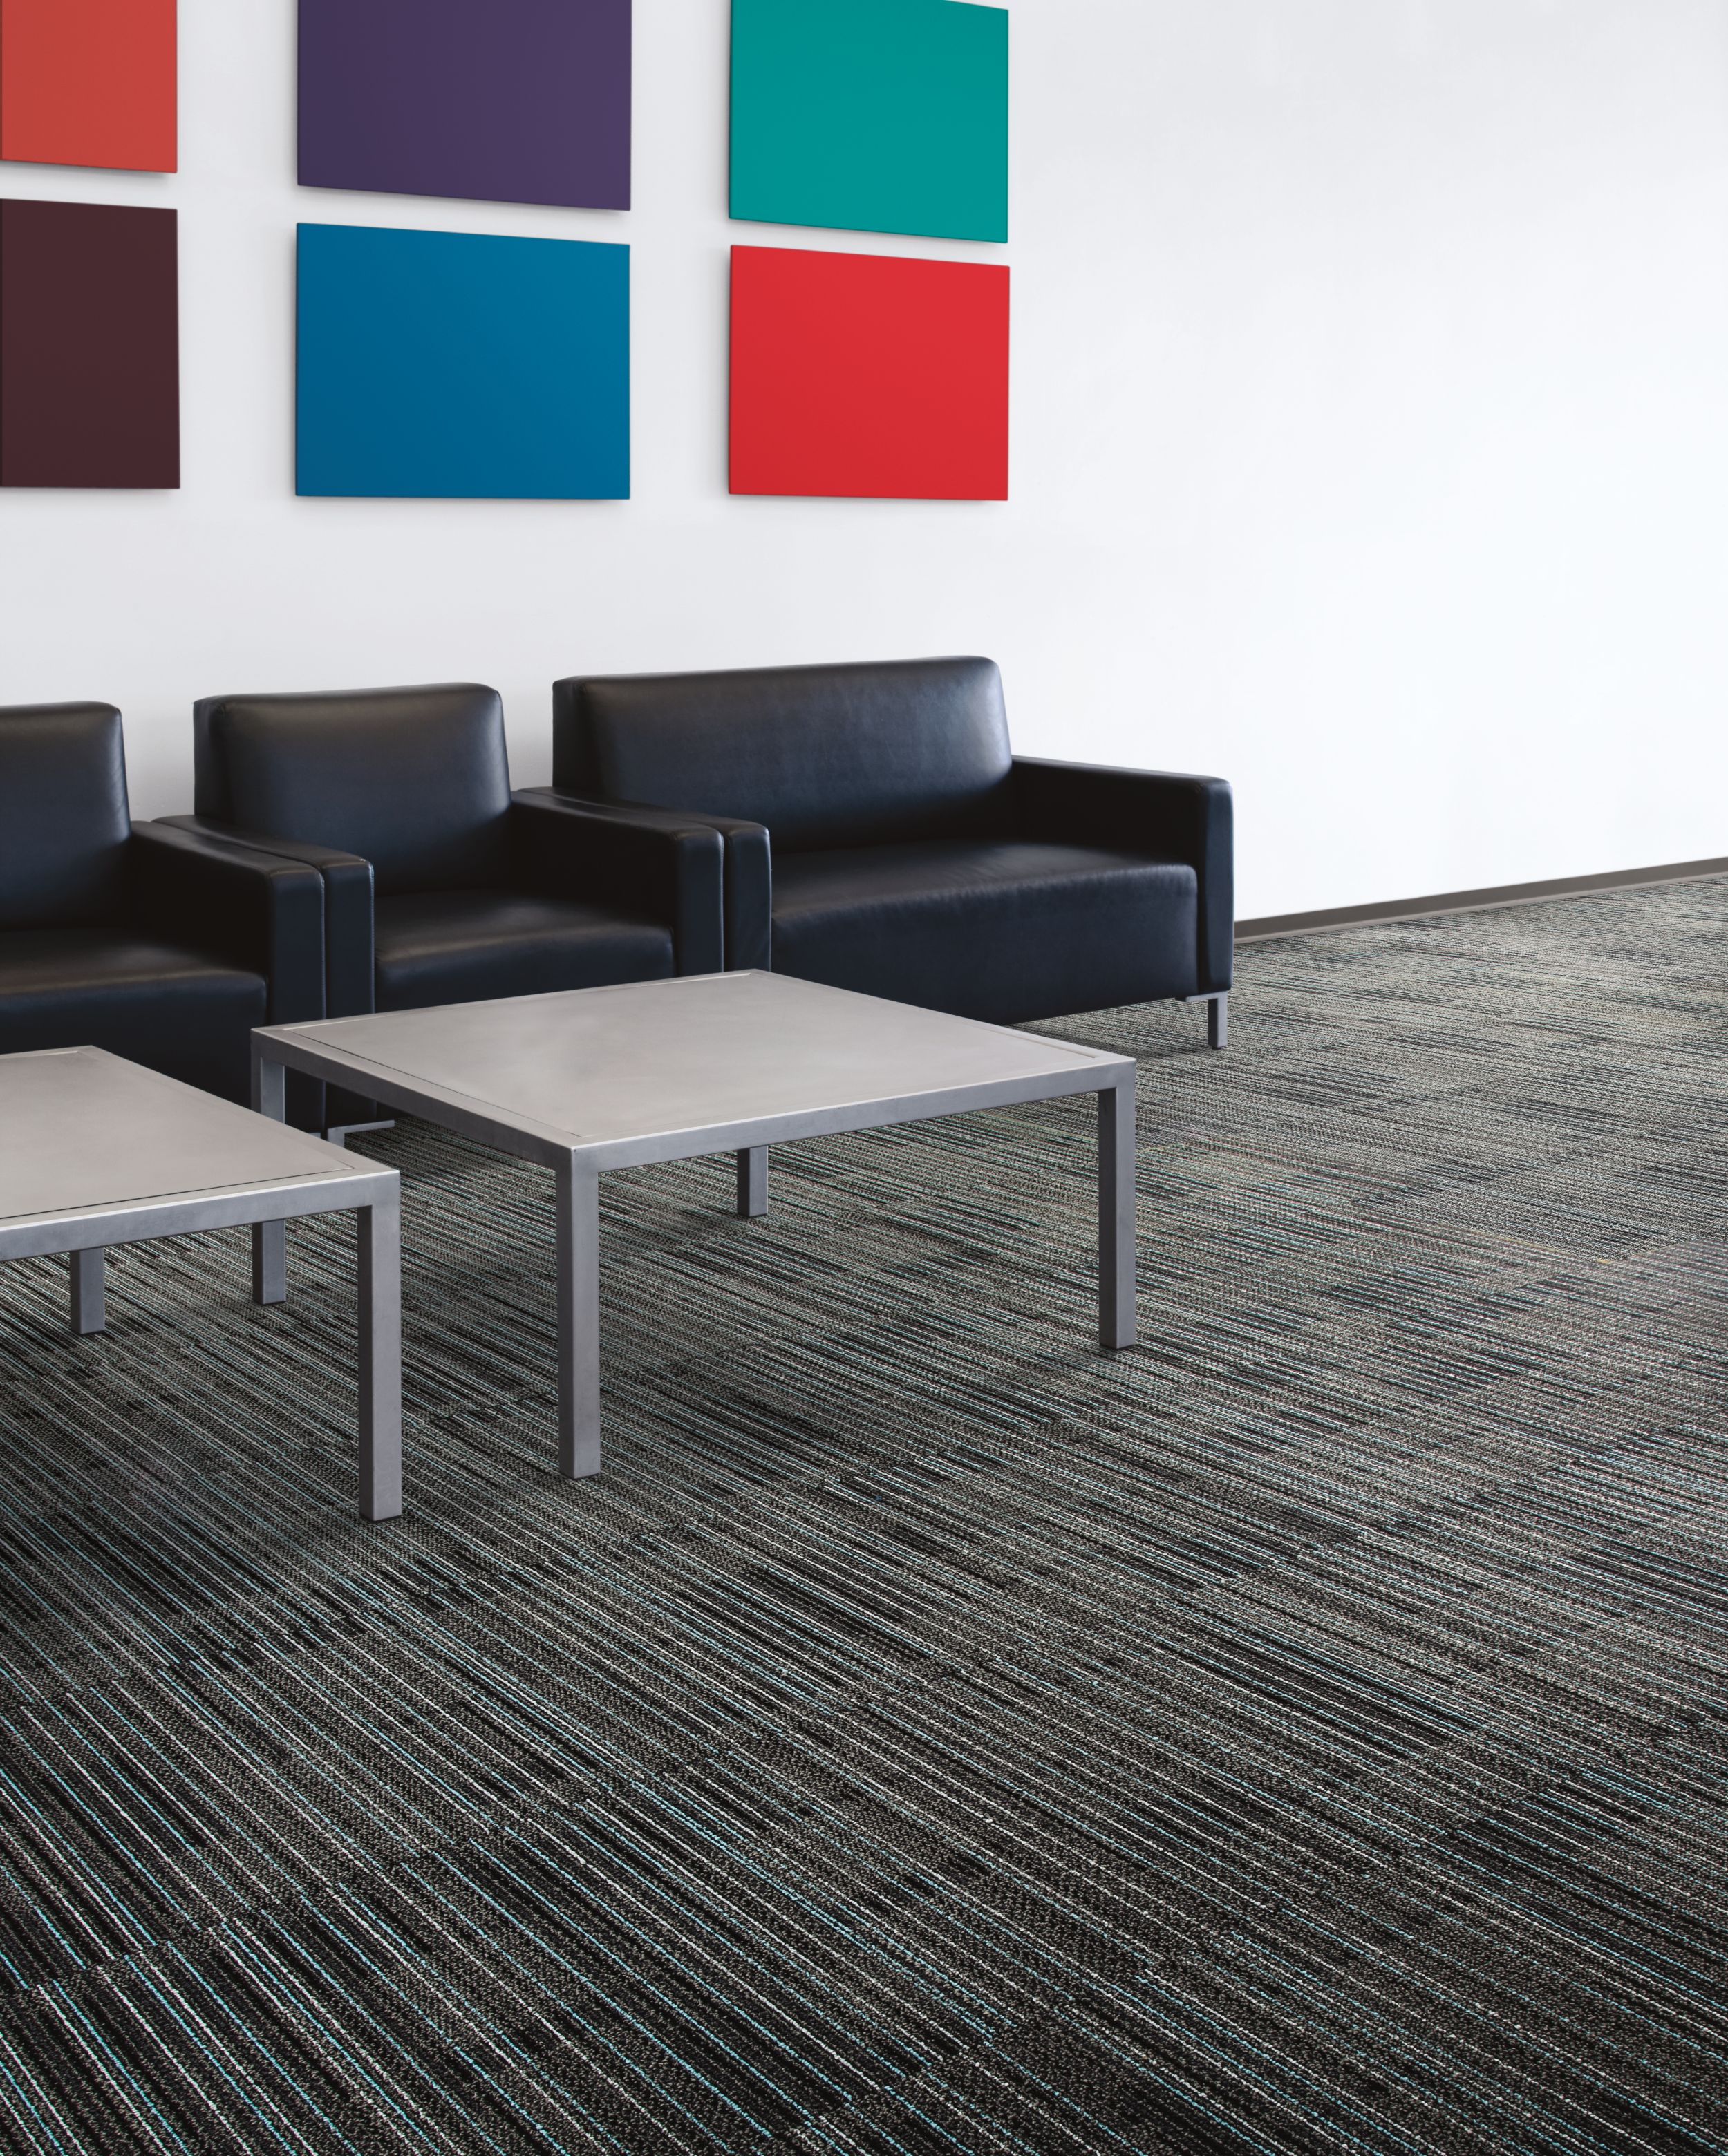 Interface Gather carpet tile in seating area with black chairs and colorful artwork numéro d’image 2